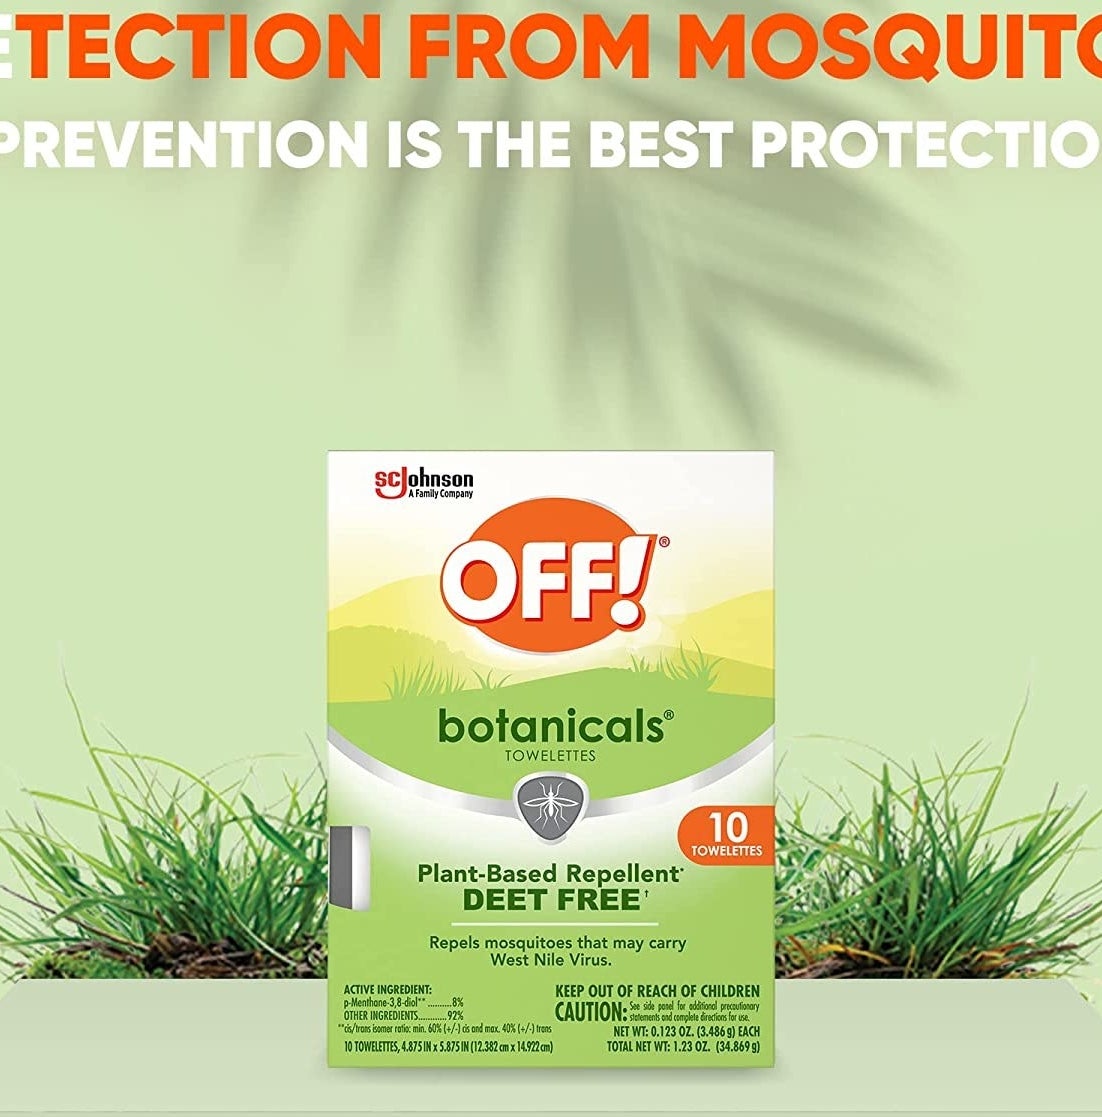 The insect repellent wipes